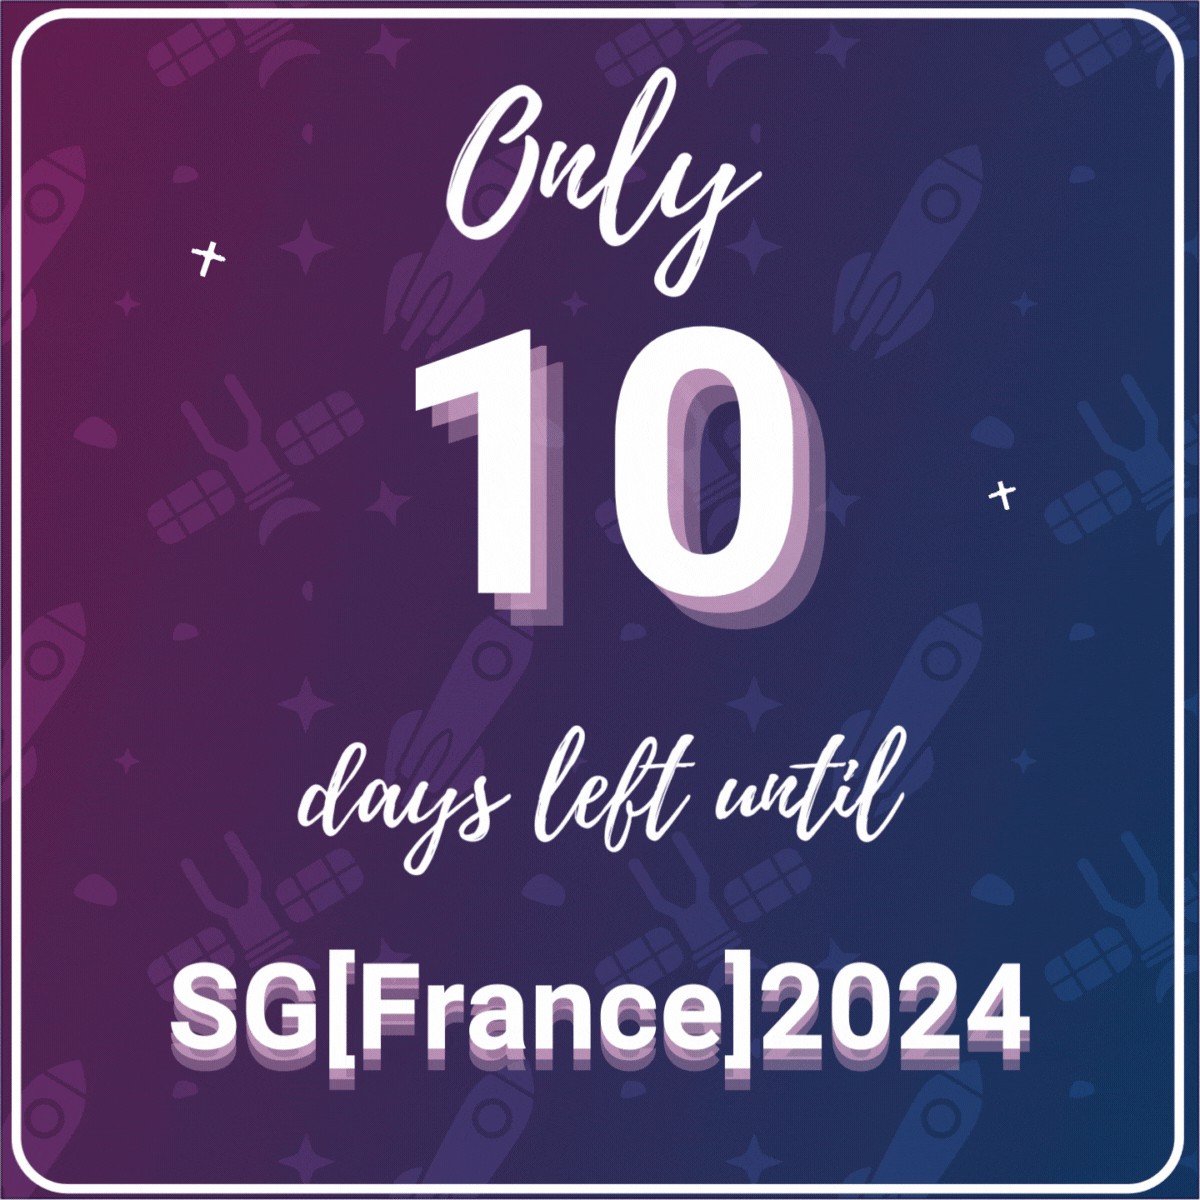 🚀 Only 10 days until SG[France] 2024 in Lyon, May 18th, 2024! ✨ We can't wait to connect with you all and exchange on space sustainability! Get ready for an inspiring event! 🌍 How to come: spacegeneration.org/sgfrance-2024-… #SGFrance2024 #SpaceSustainability